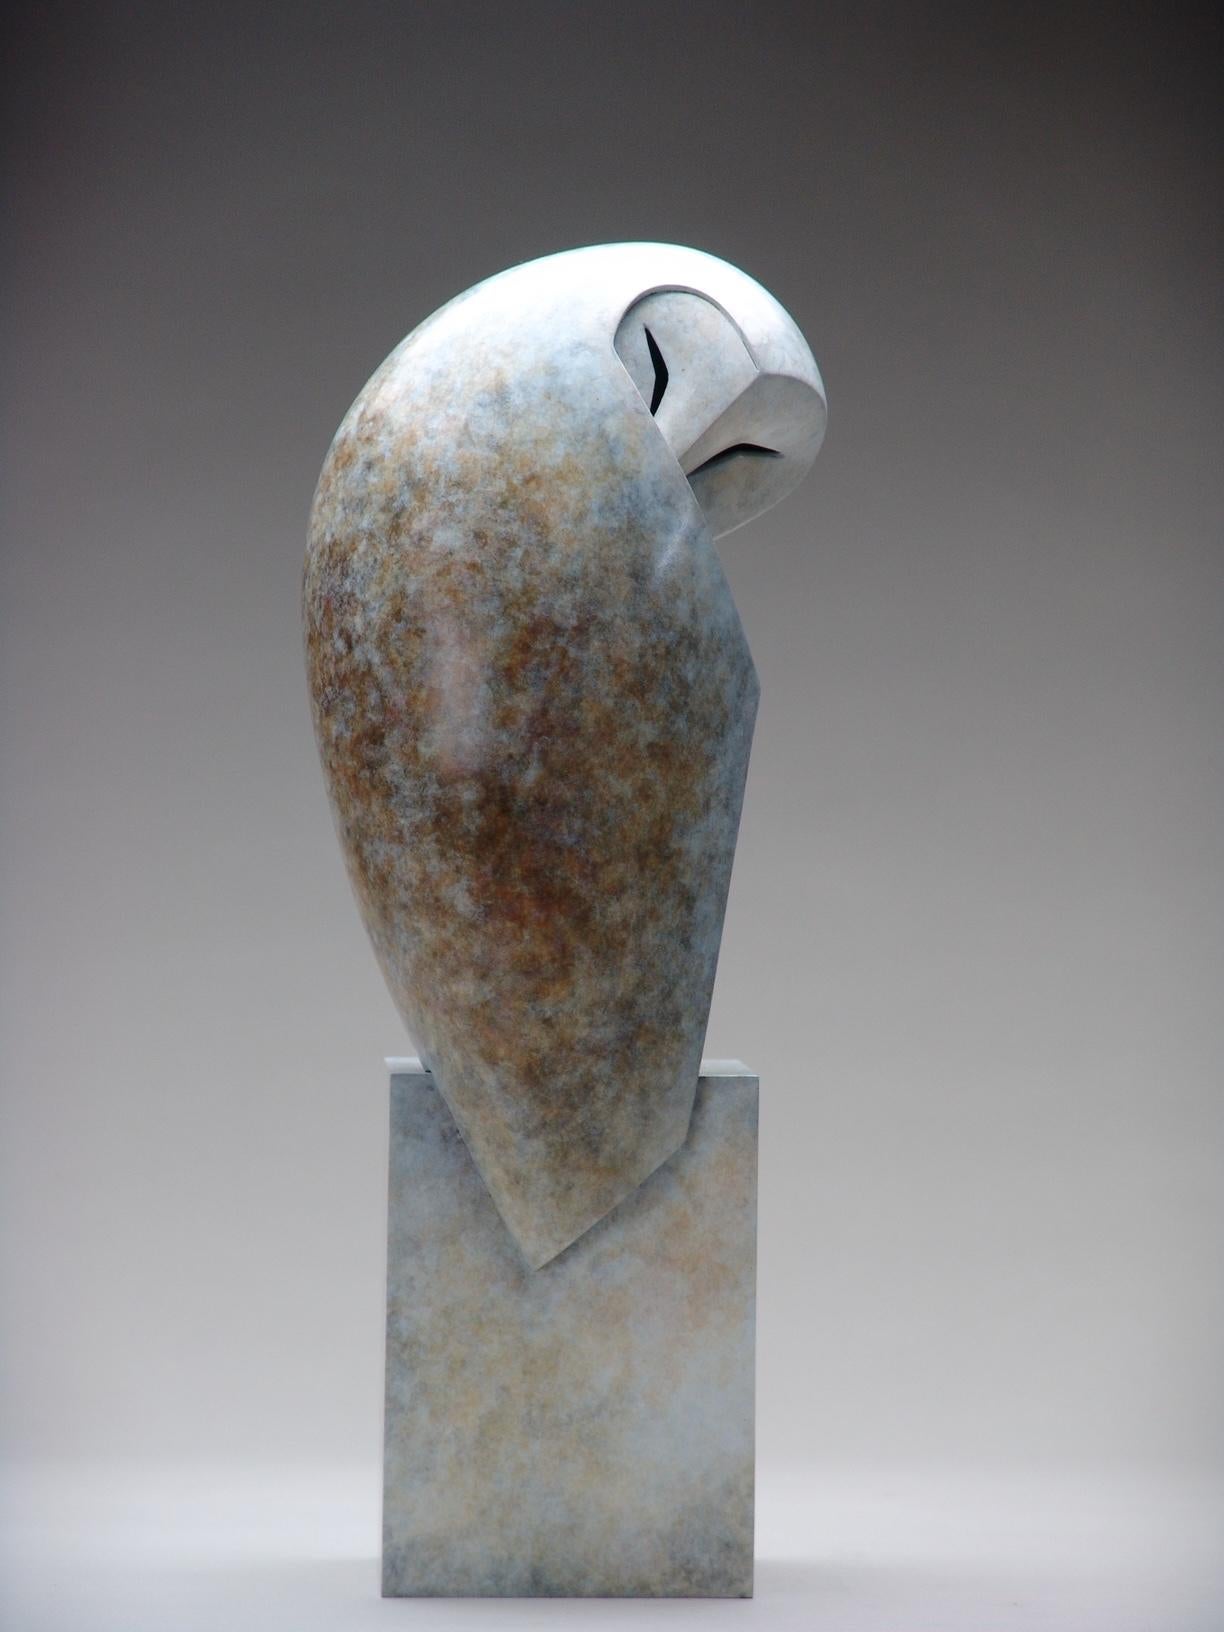 Anthony Theakston Figurative Sculpture - "Bastion" Contemporary Bronze Sculpture Portrait of an Owl, Barn Owl White Brown